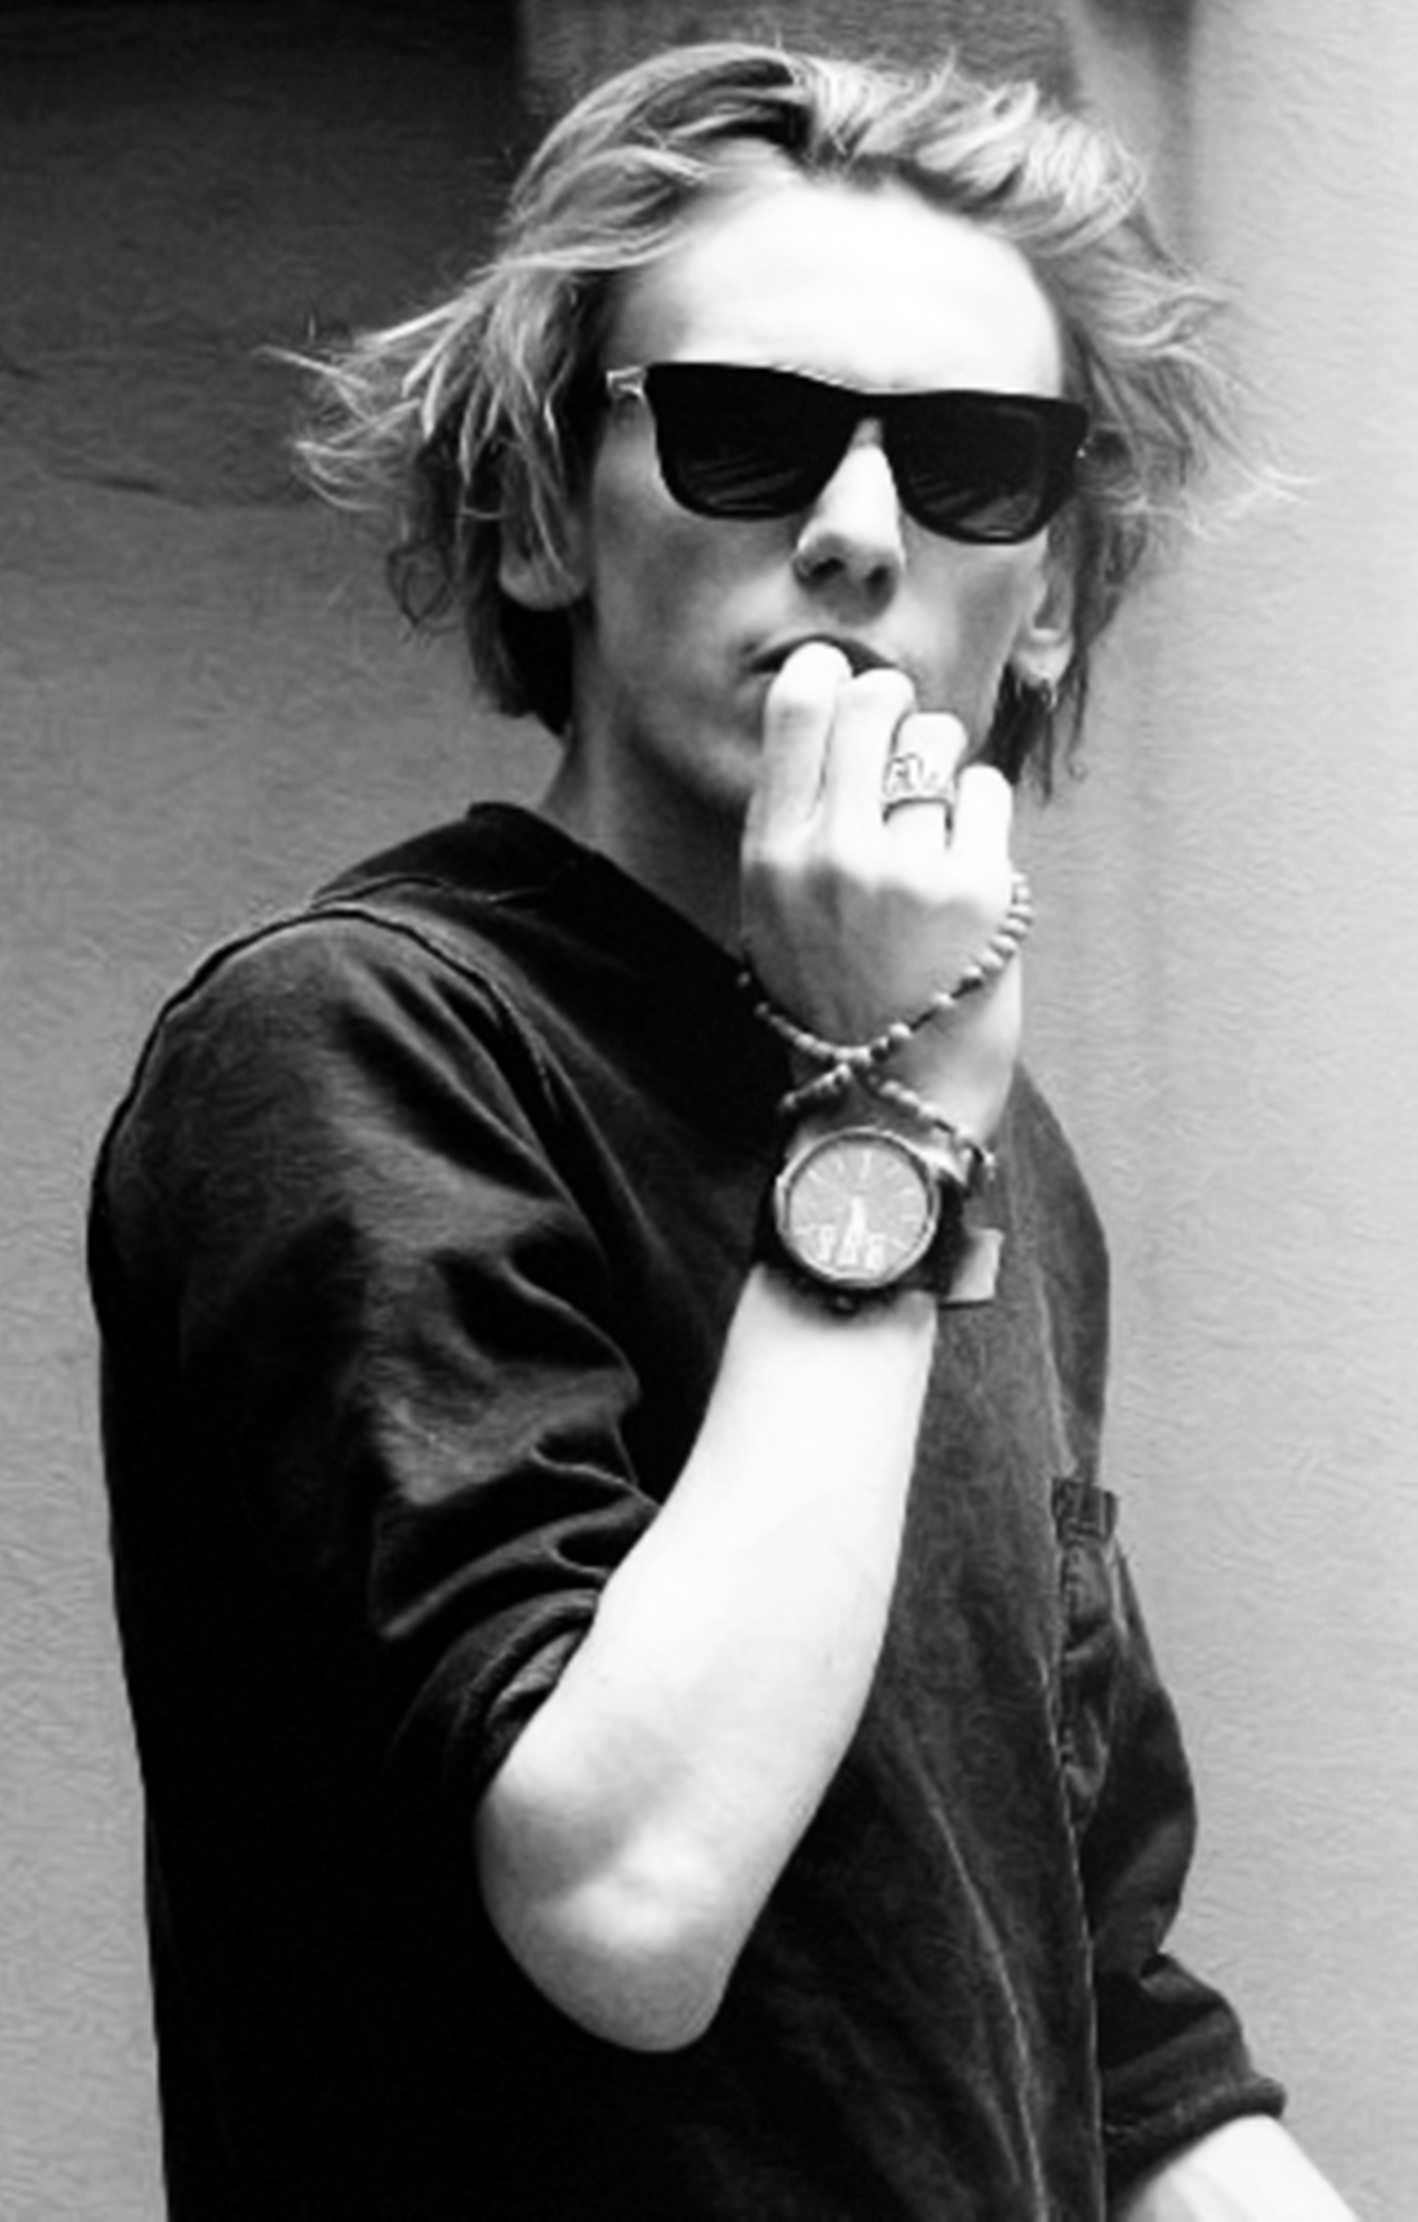 Best Jamie Campbell Bower image. jamie campbell bower, jamie campbell, jamie